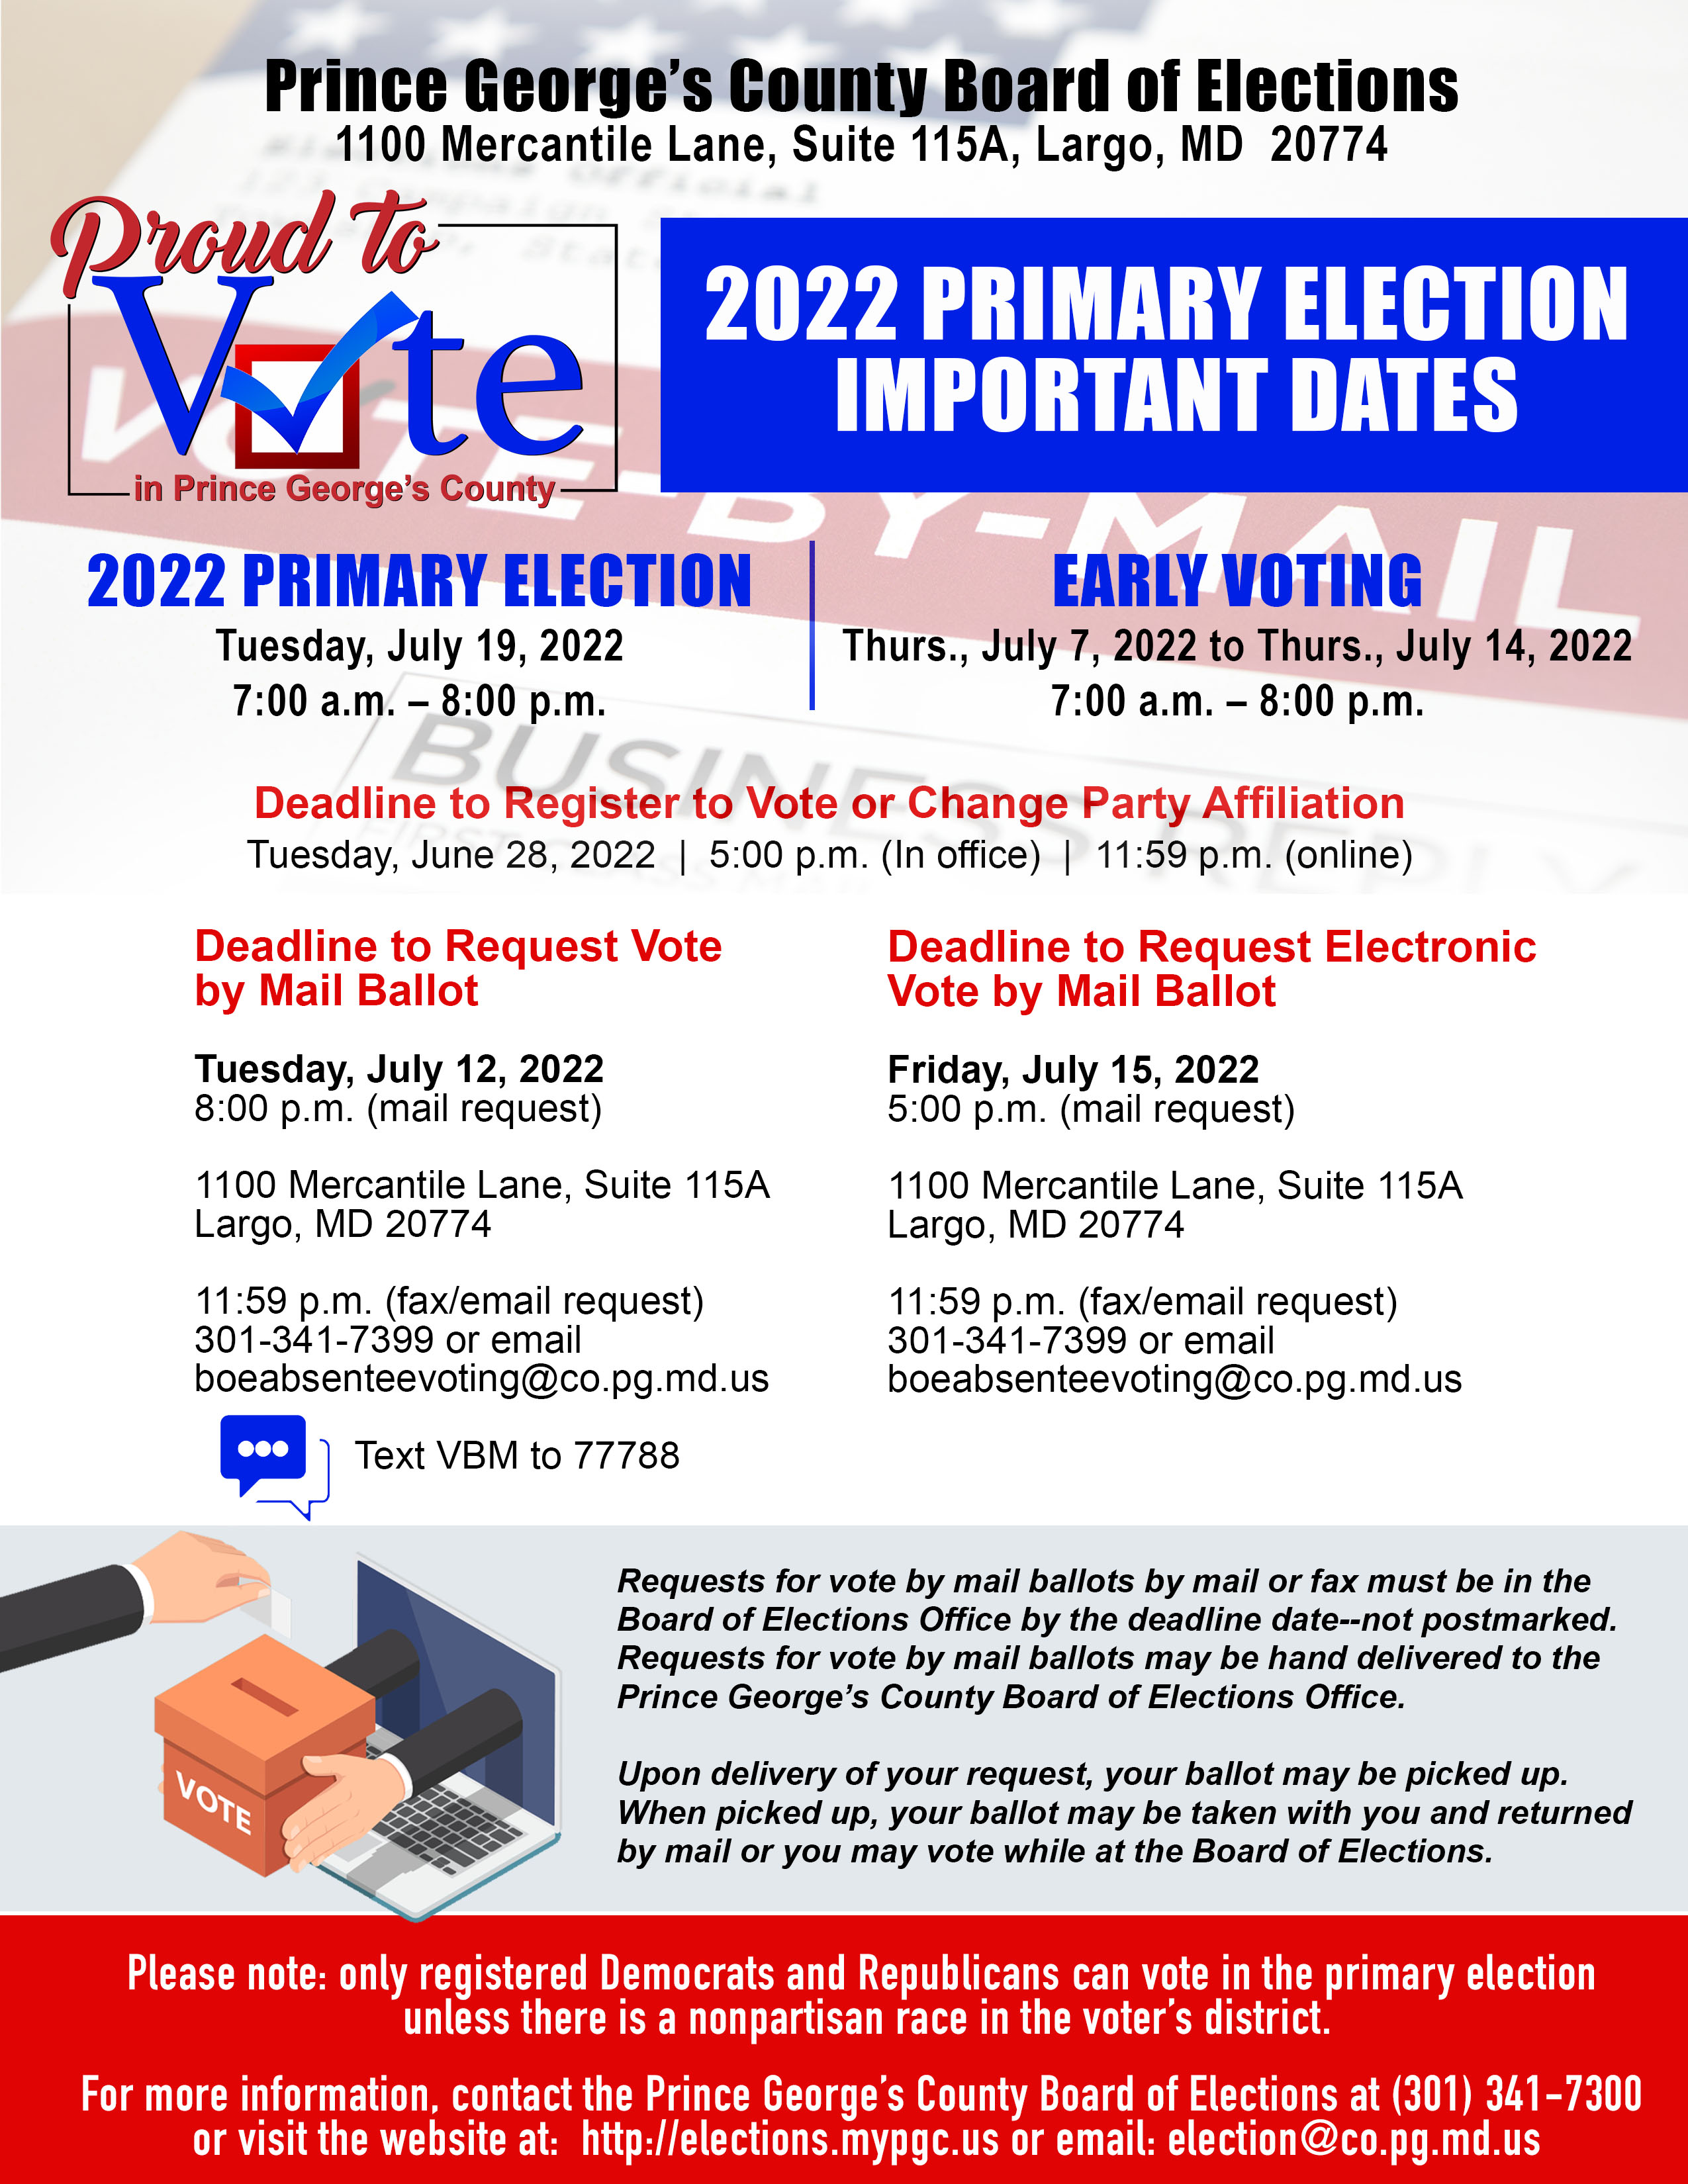 2022 Primary Election Important Dates